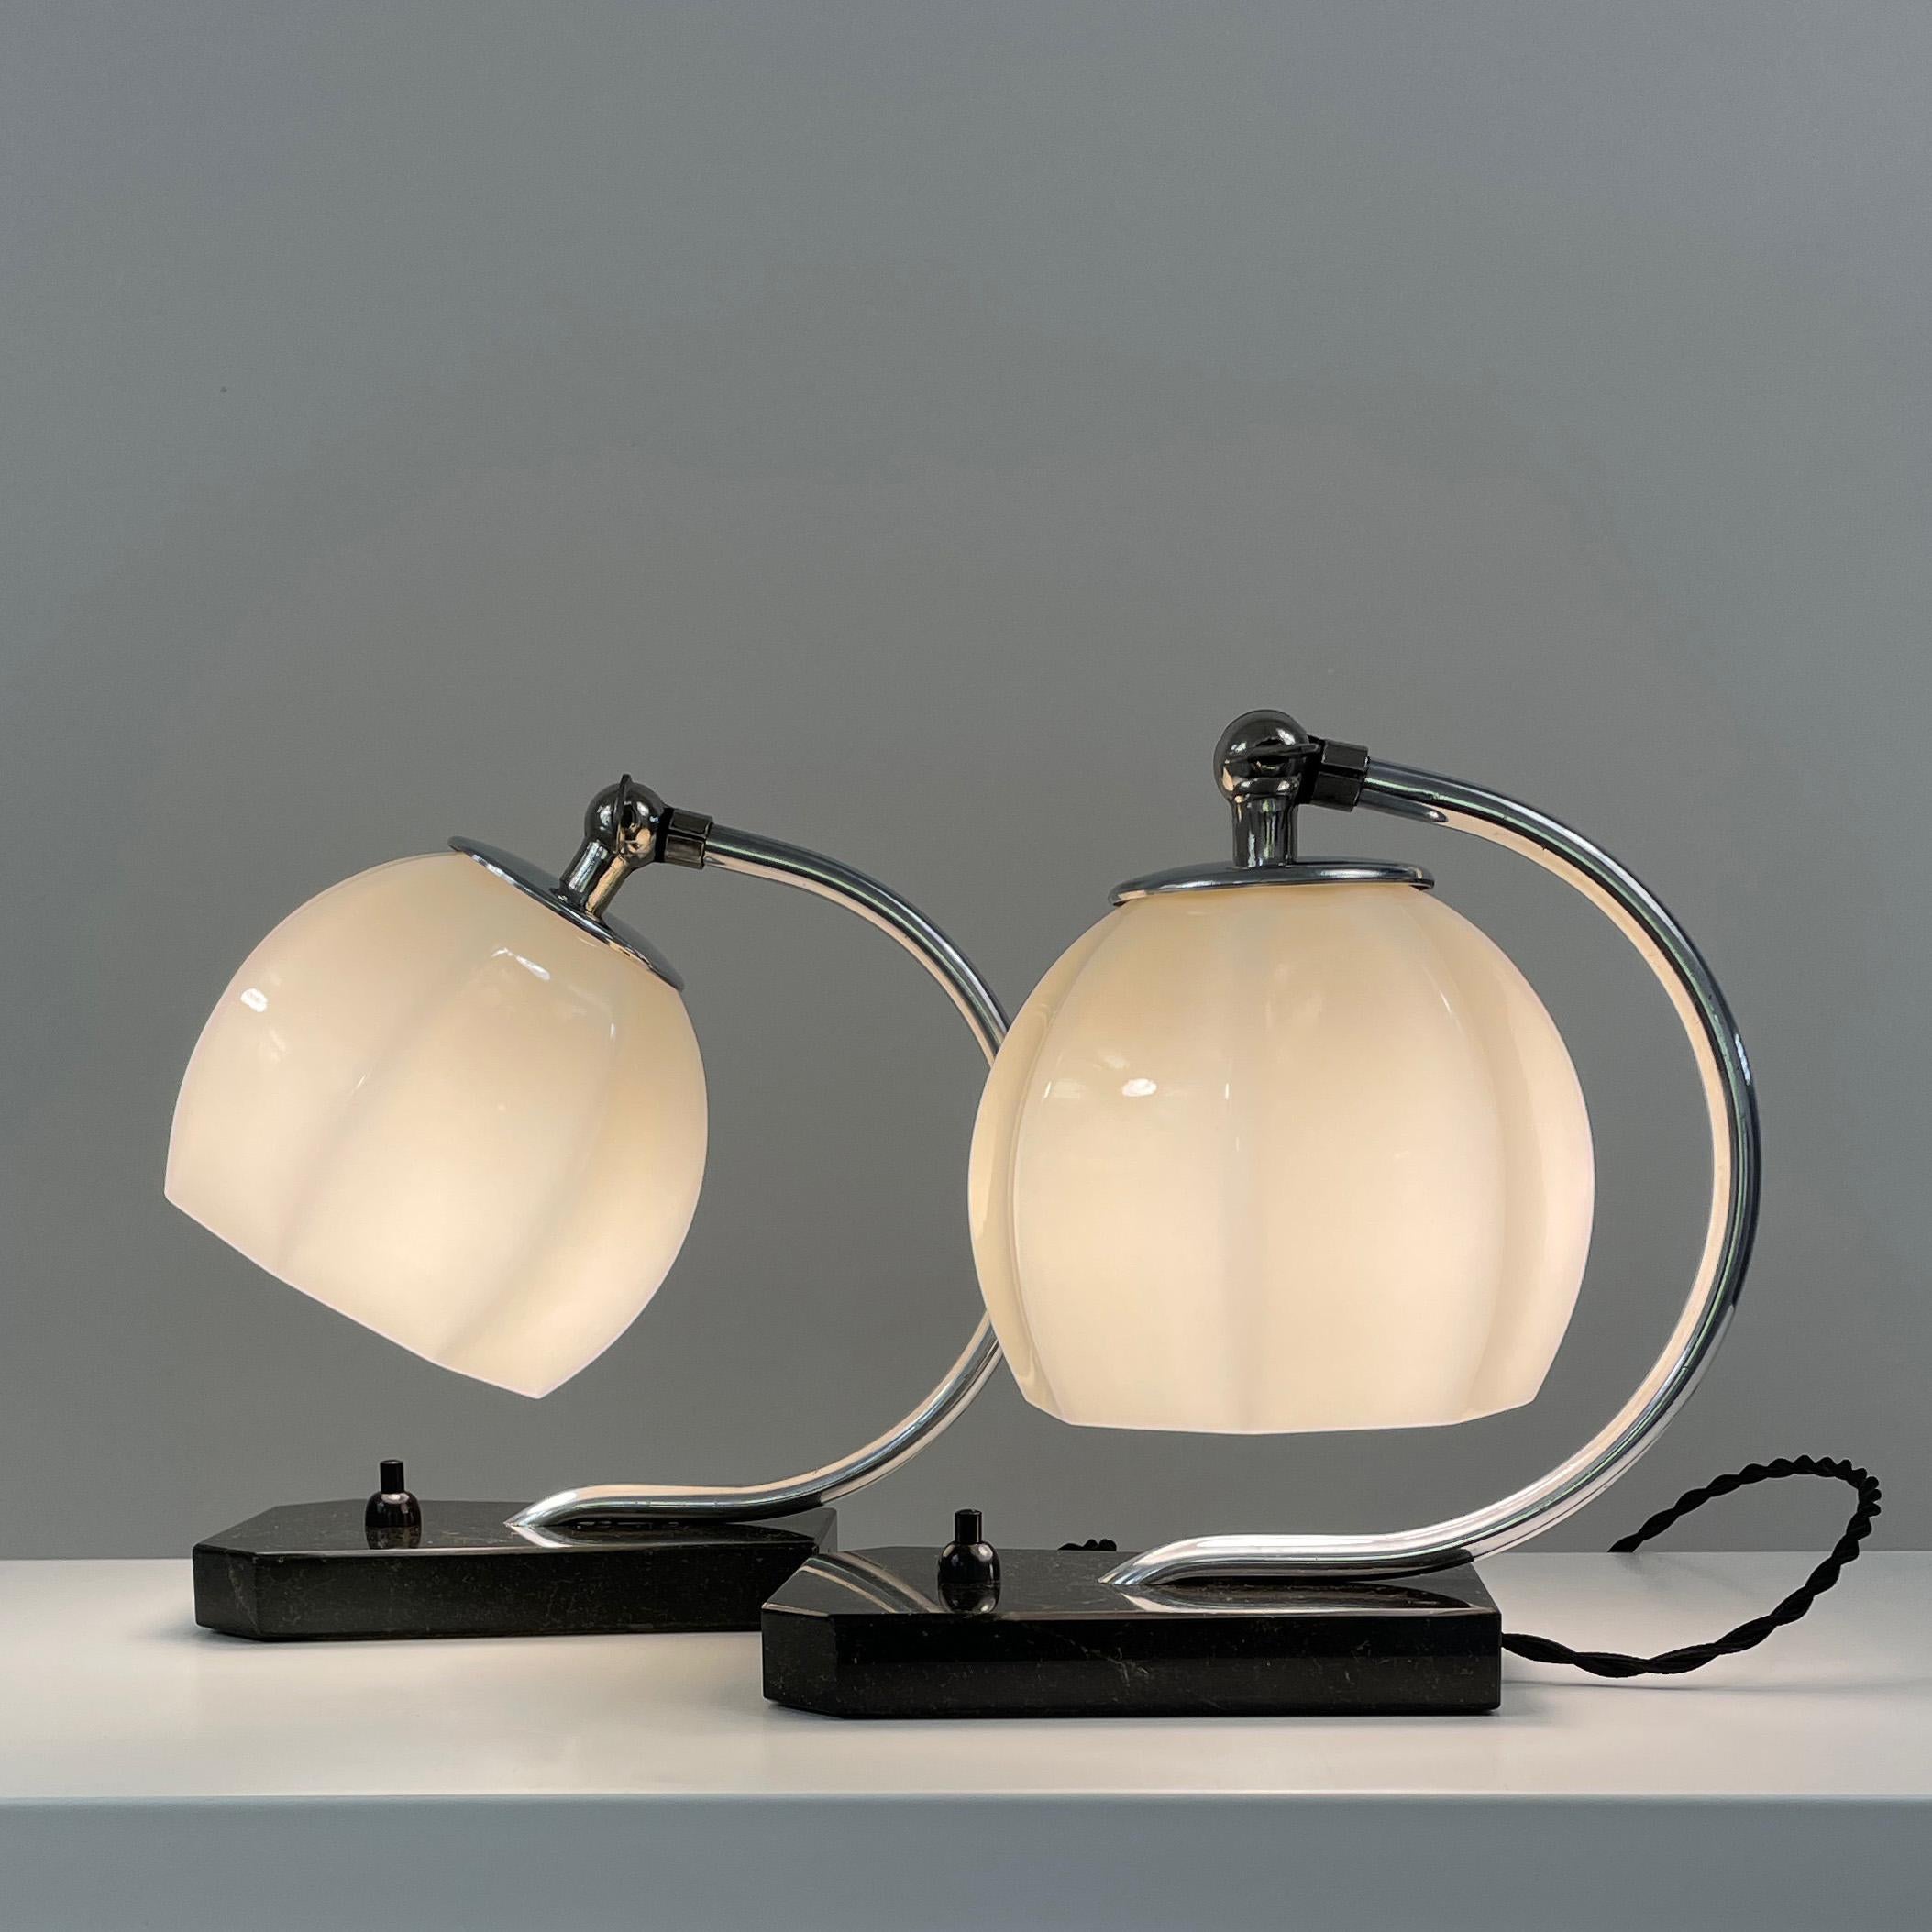 German Art Deco Opaline Glass, Marble and Aluminum Table Lamps, 1930s For Sale 10